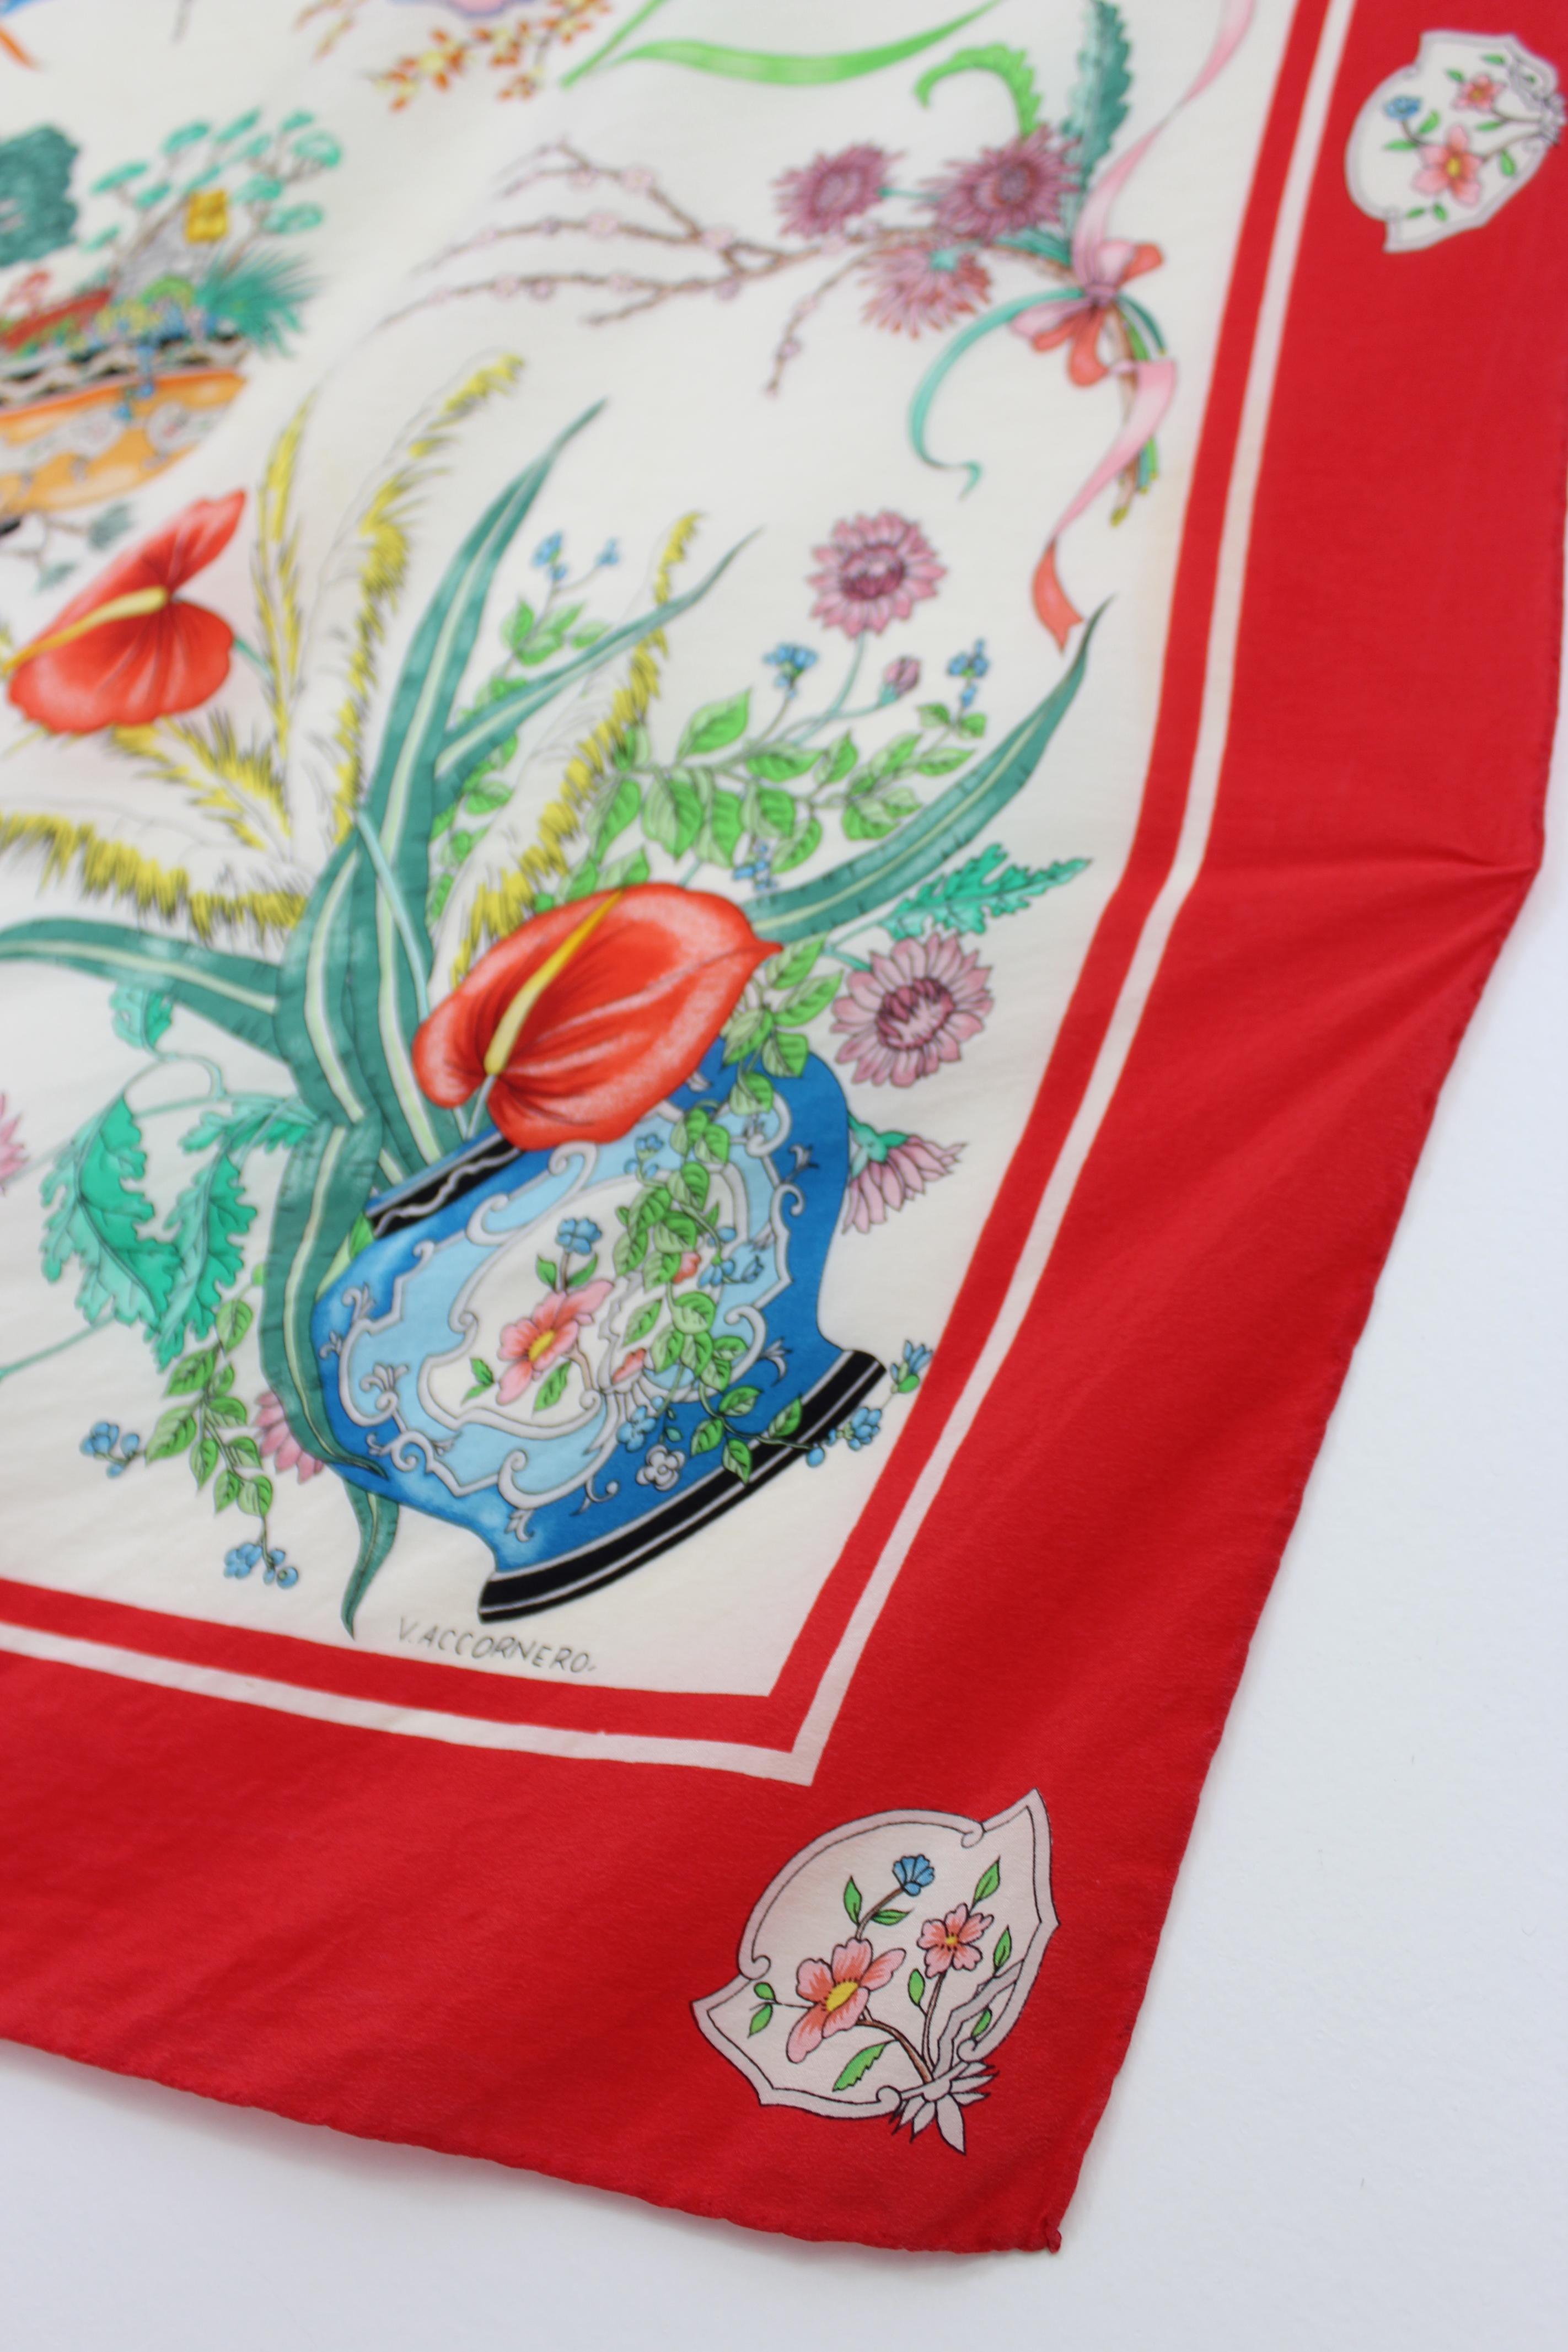 Gucci Accornero vintage 70s scarf. Red and beige foulard, colorful floral designs. 100% silk fabric. Made in Italy. Good vintage condition, some stains due to use over time.

Measures: 86 x 83 cm